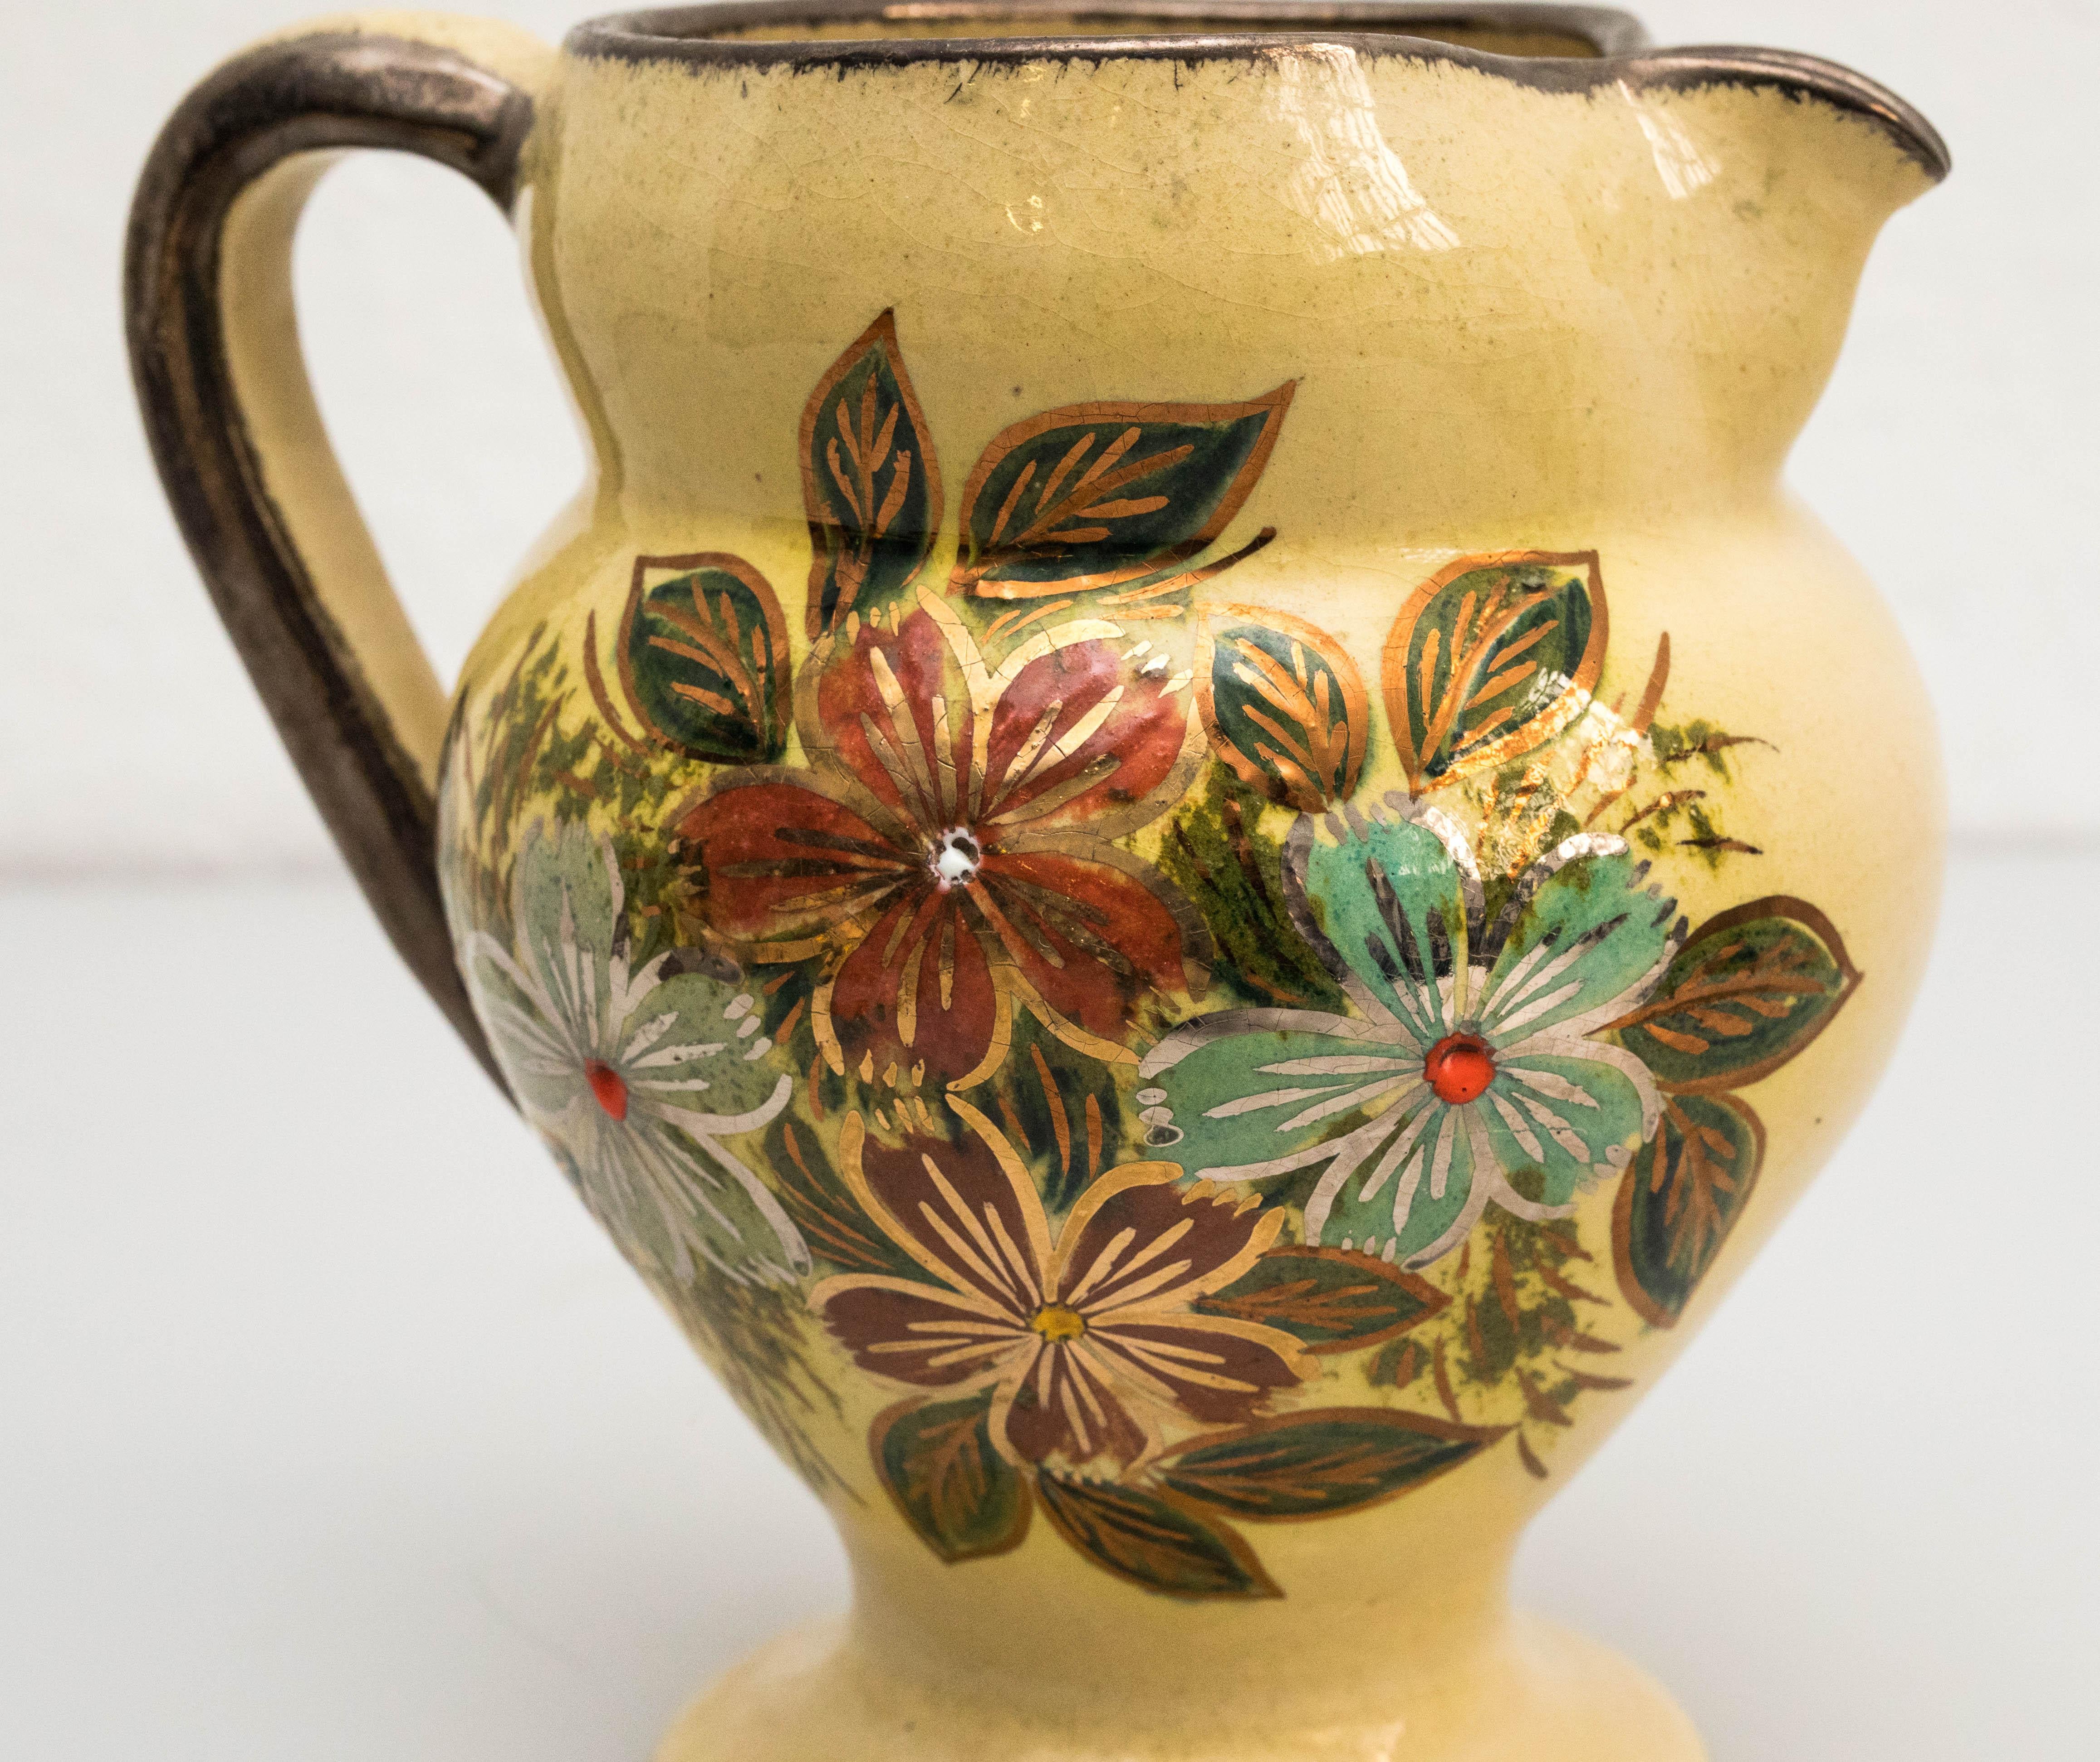 Ceramic Hand Painted Vase by Catalan Artist Diaz Costa, circa 1960 For Sale 6